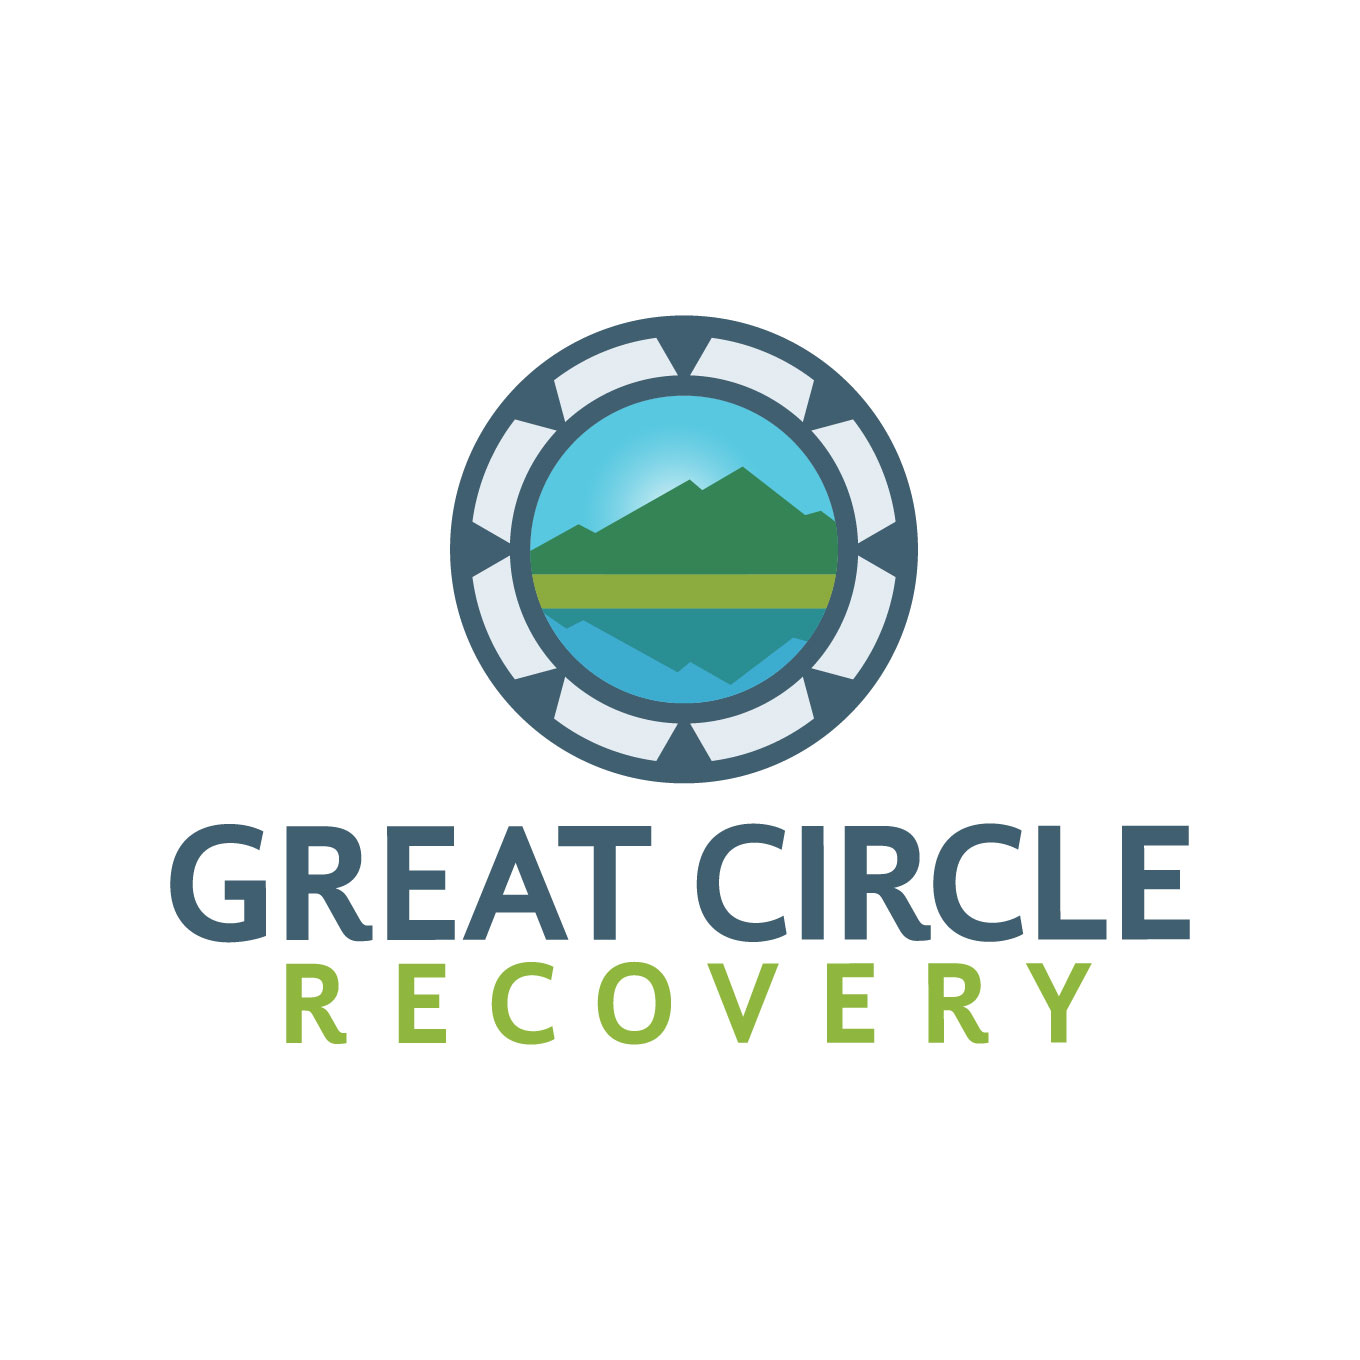 Logo design for the Great Circle Recovery clinics.